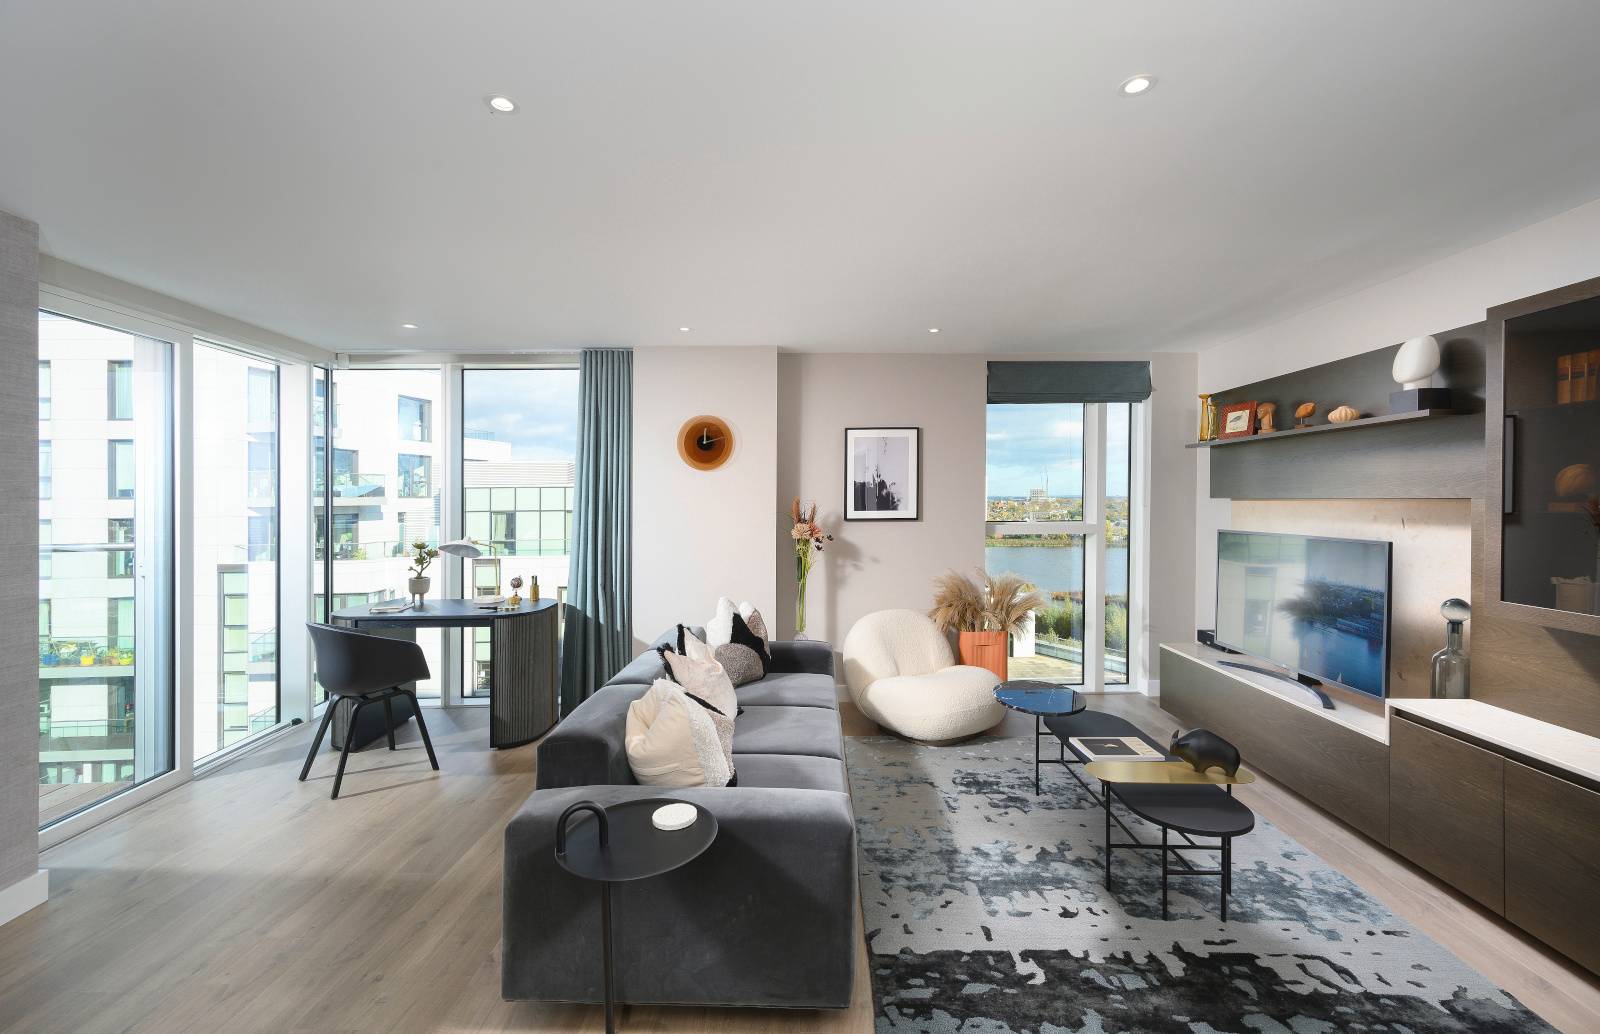 Hidden Oasis, 10 minutes from Central London -  Luxury 2-Bedroom Penthouse in a Stunning New Development Surrounded by Nature - Eighteenth Floor - Reservoirs and Park Views